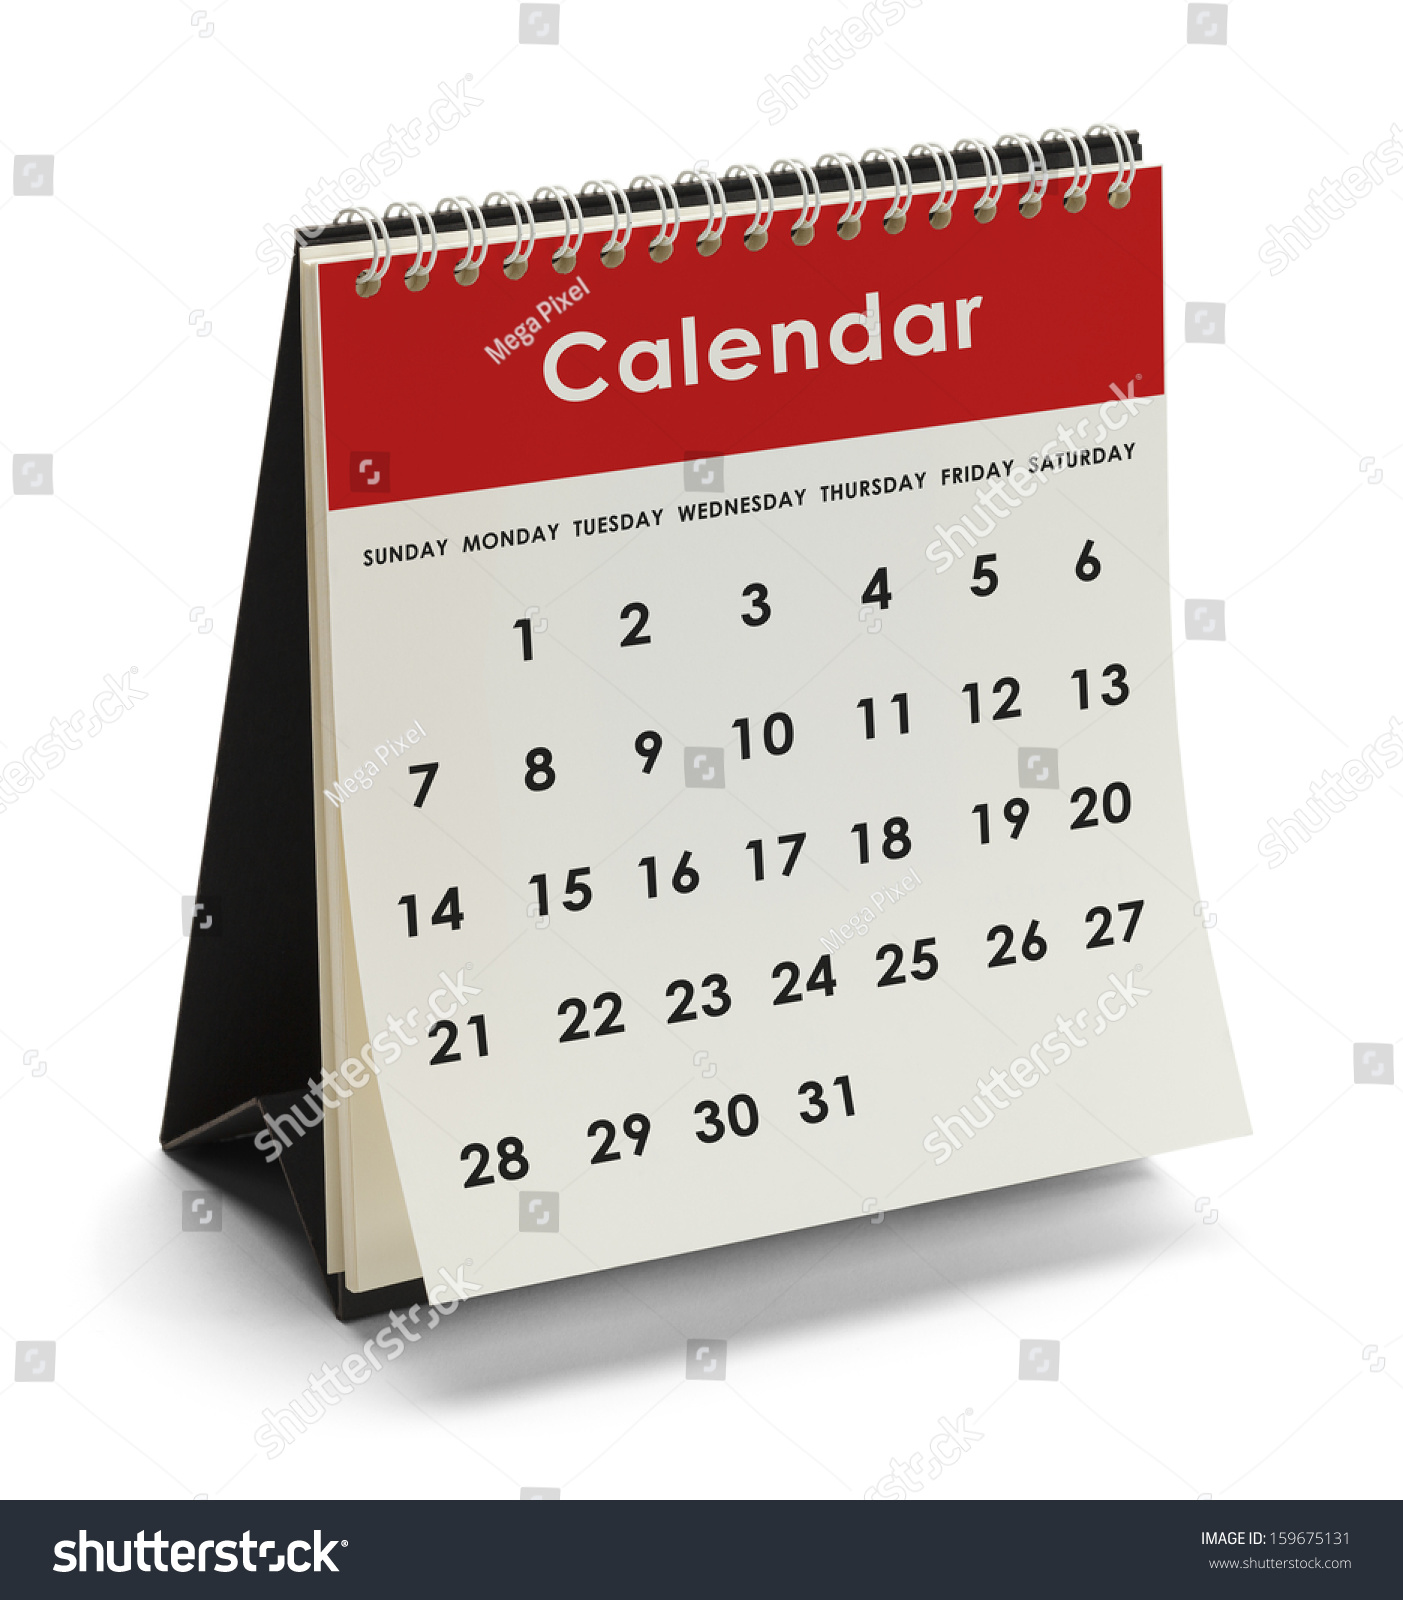 Generic Calendar With Days and Dates Isolated on White Background. #159675131